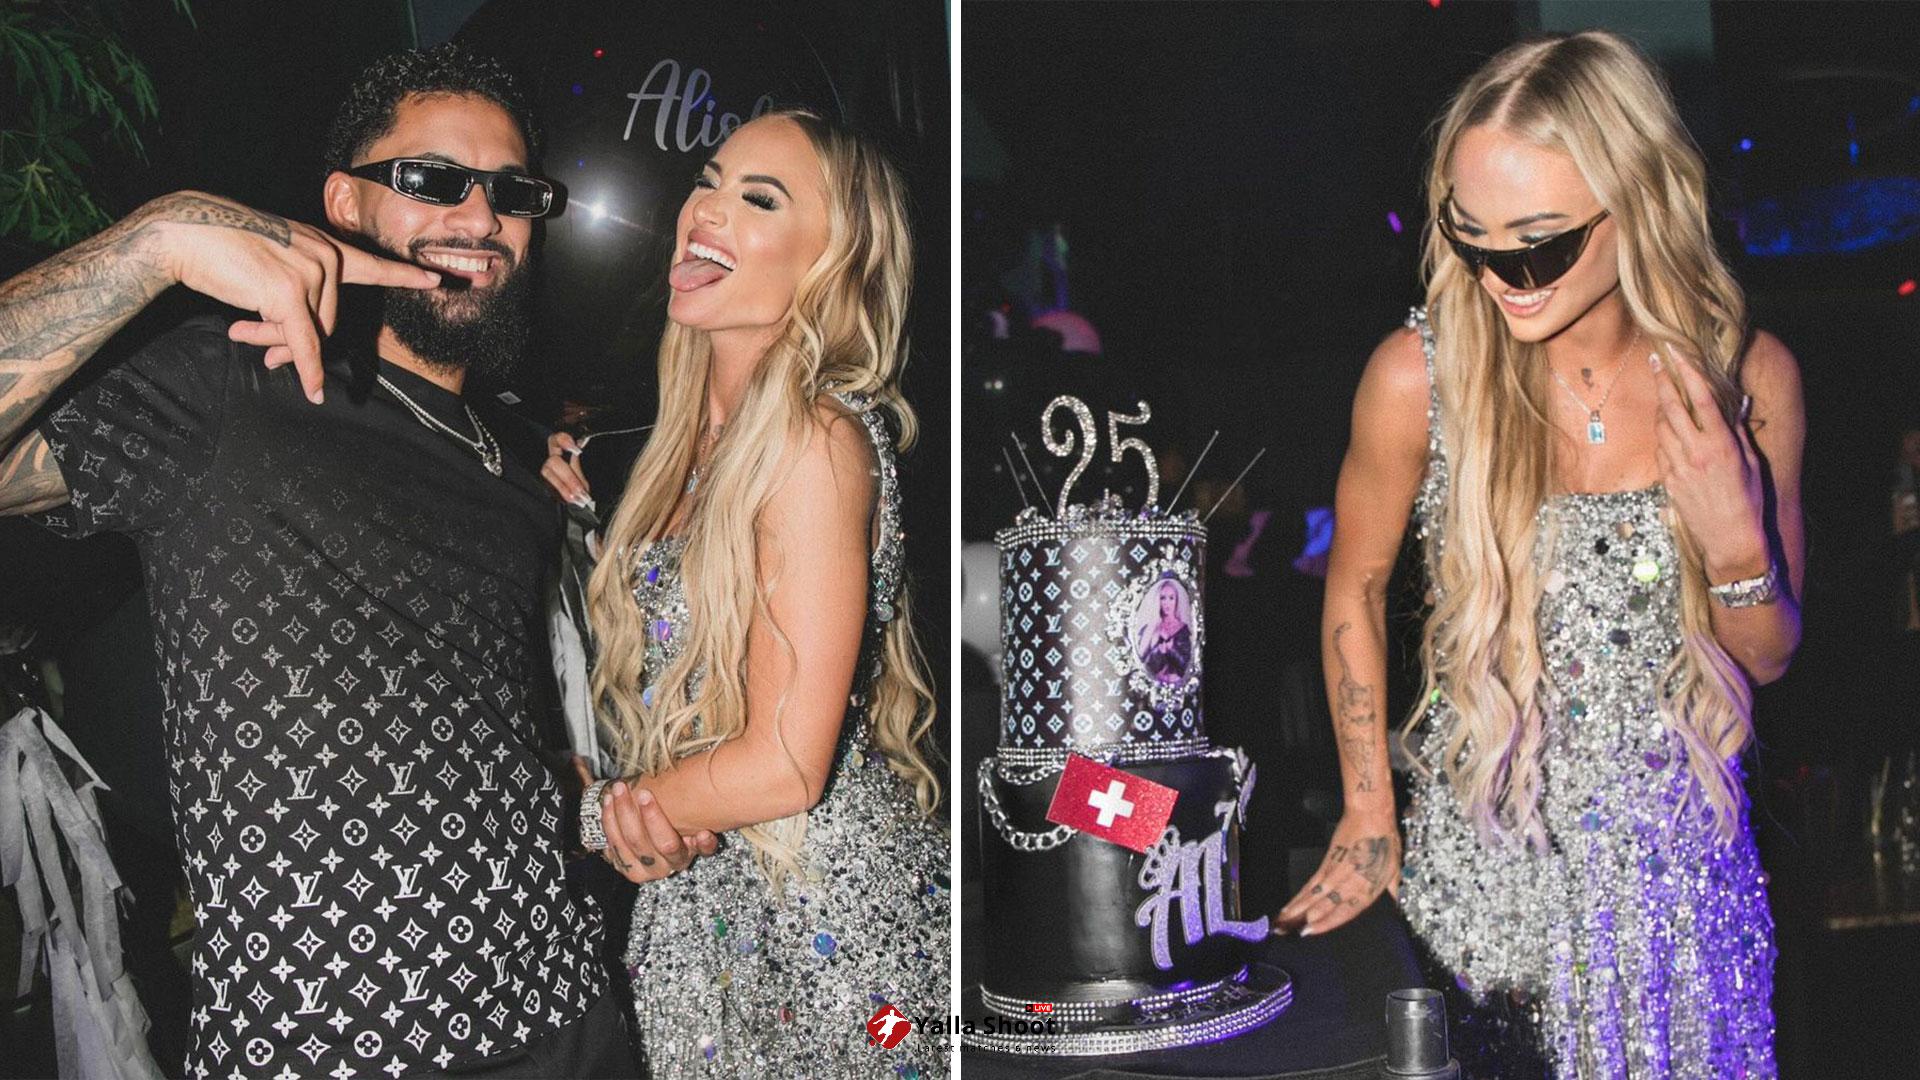 Alisha Lehmann stuns in silver dress at glitzy 25th birthday party and confirms she is back with Douglas Luiz